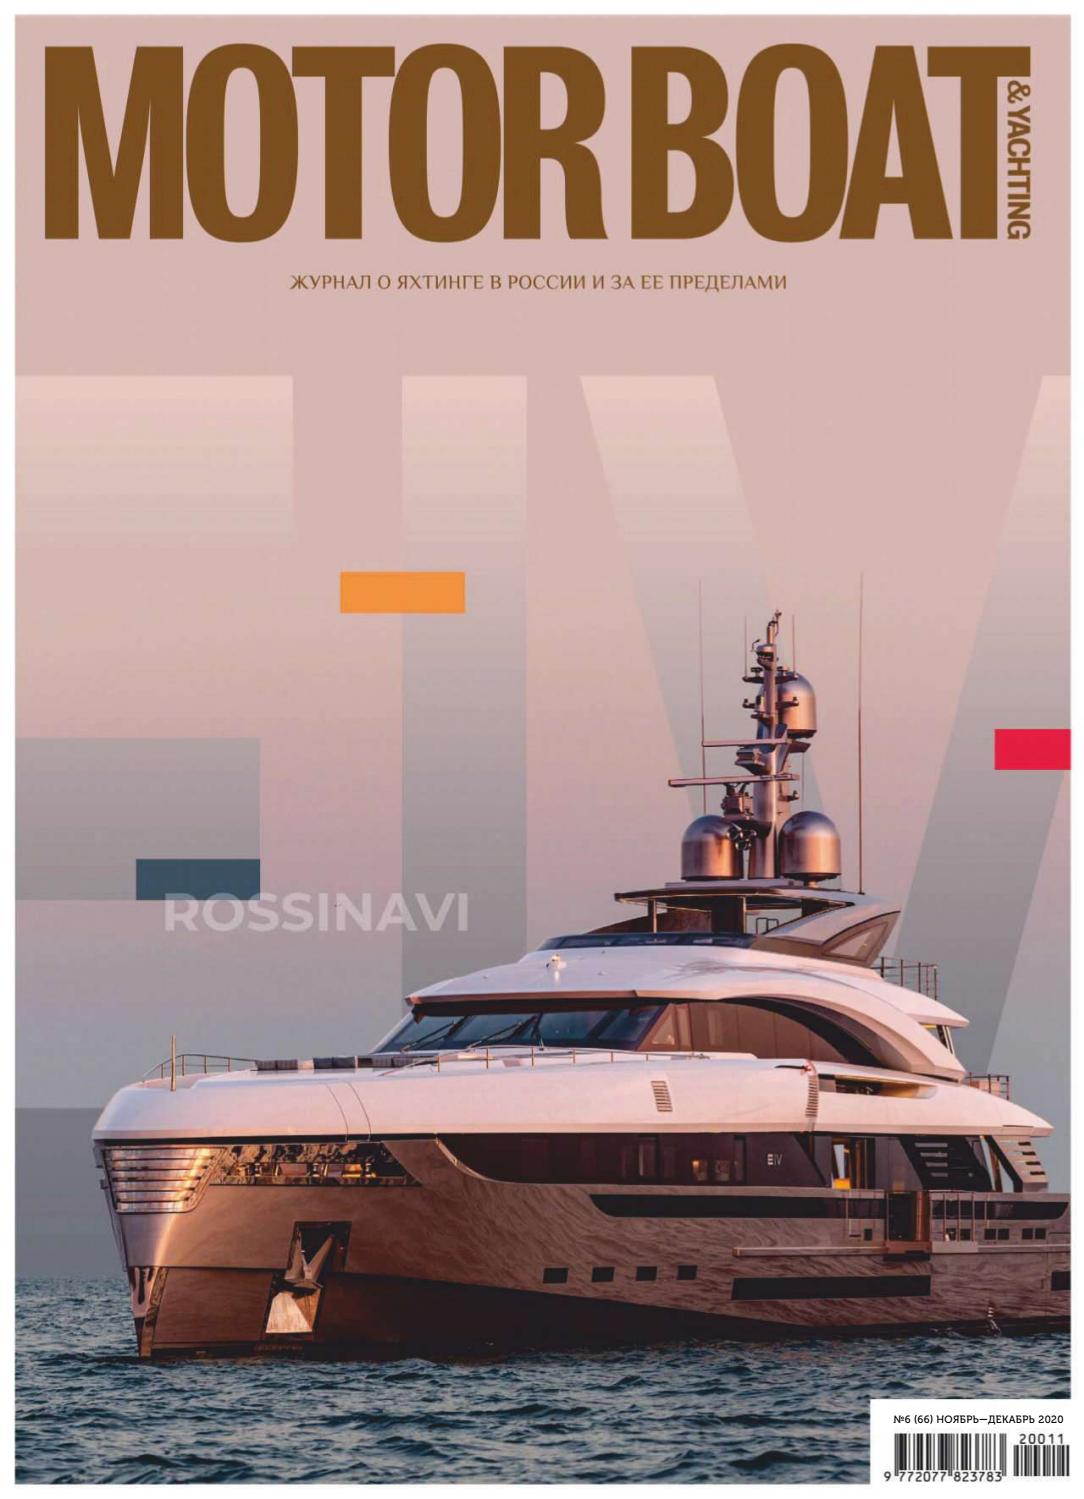 Motor Boat & Yachting Russia №6, 2020